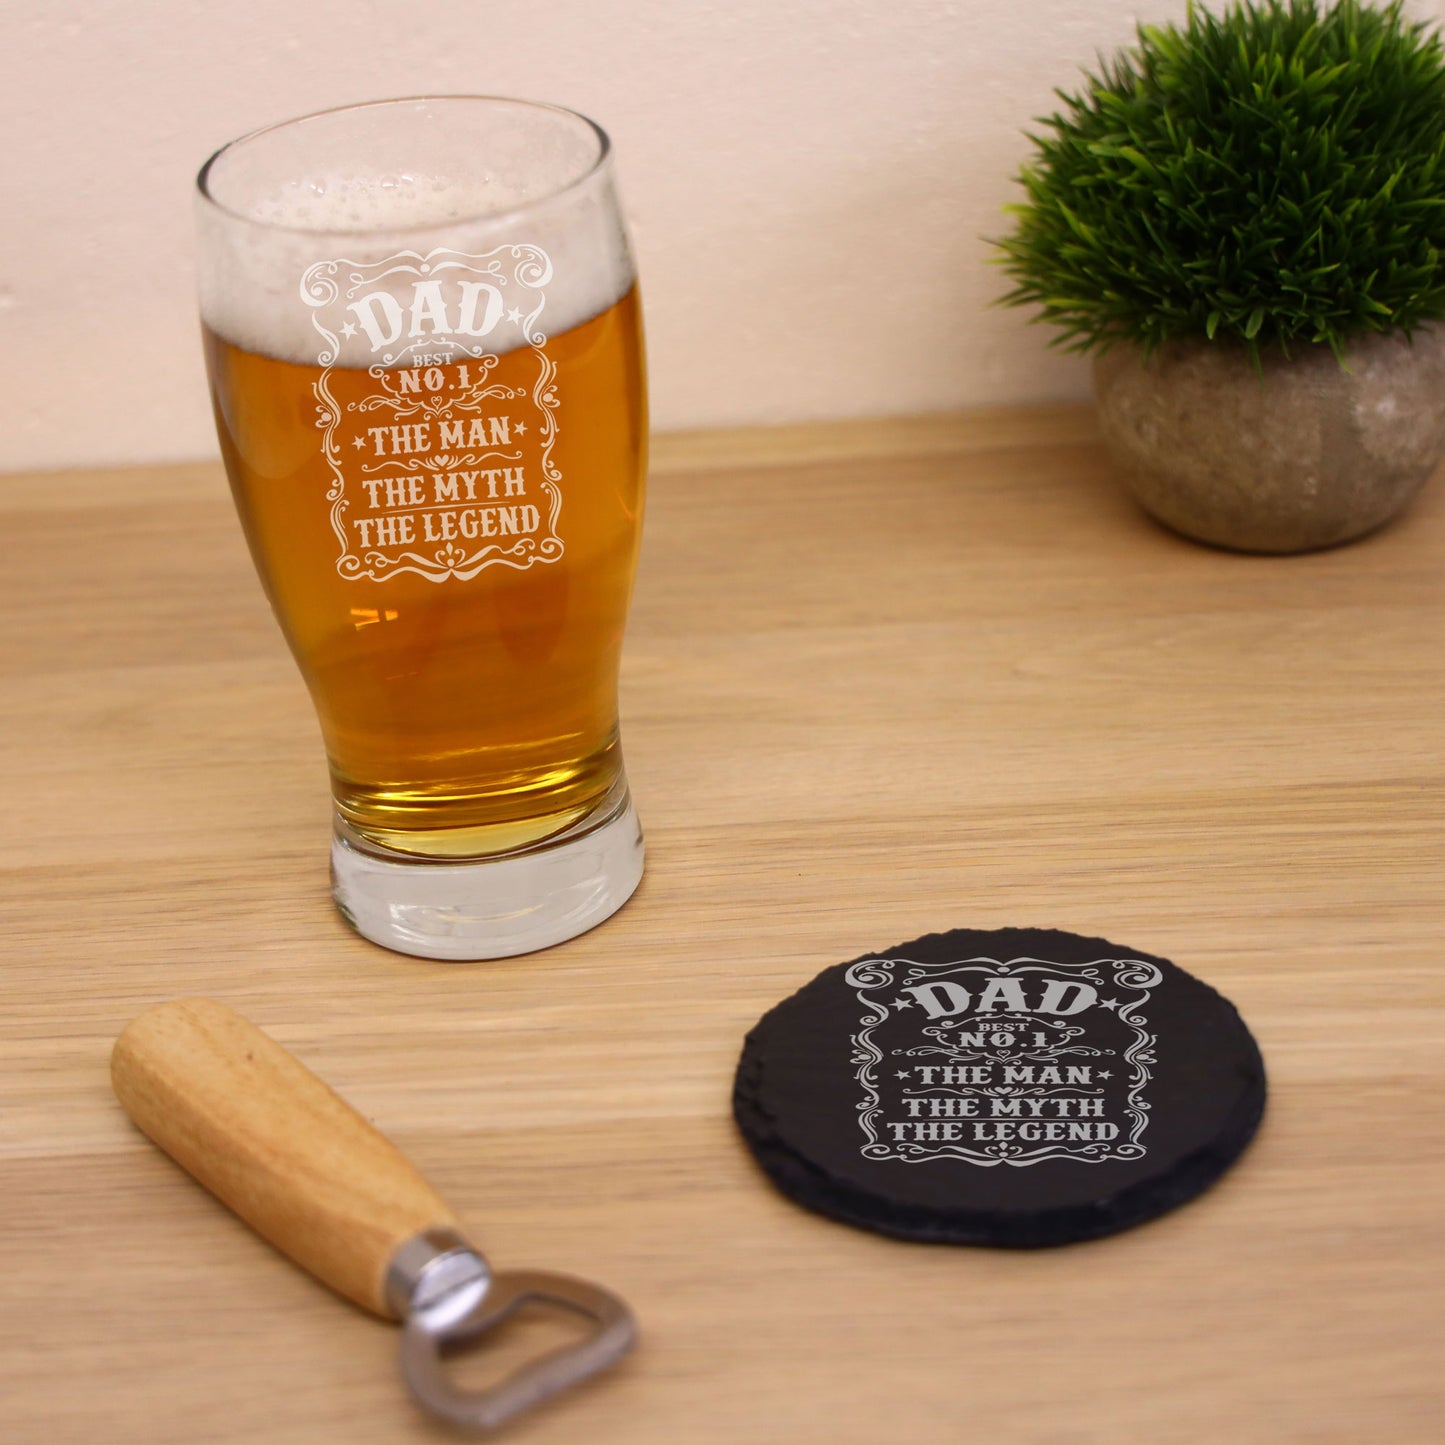 Dad The Man The Myth The Legend Engraved Beer Pint Glass and/or Coaster Set  - Always Looking Good - Glass & Round Coaster Set  